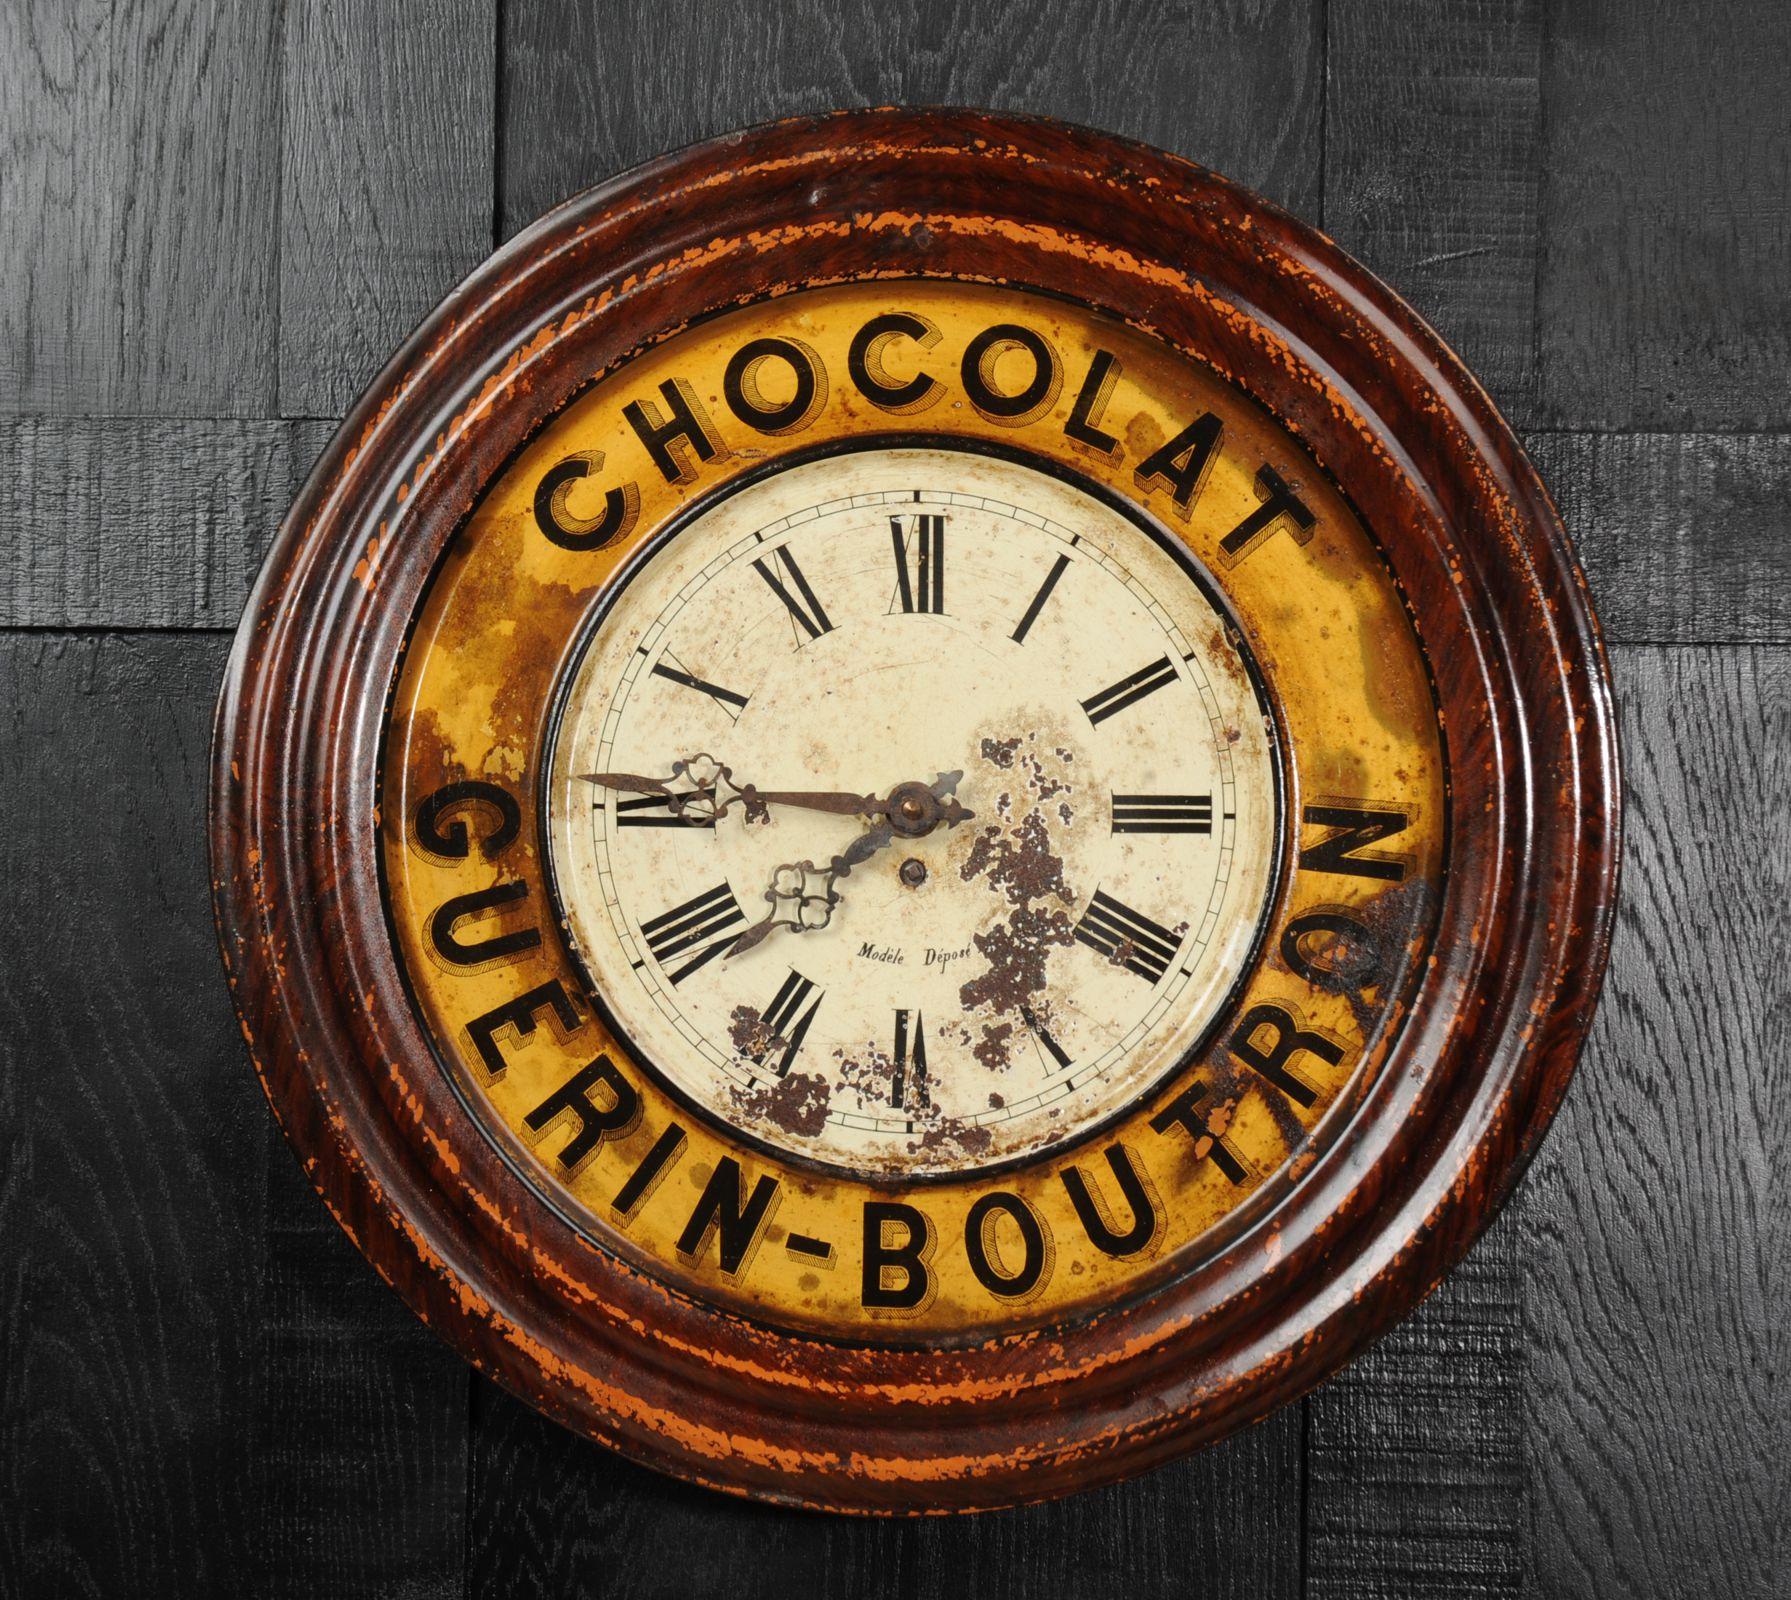 A wonderful original Guerin Boutron tole advertising clock, circa 1920. Found by our buyer in a long derelict French bar it has been worn by years of neglect with a wonderful patina of paint loss and rust. The dial is pock-marked with rust and the